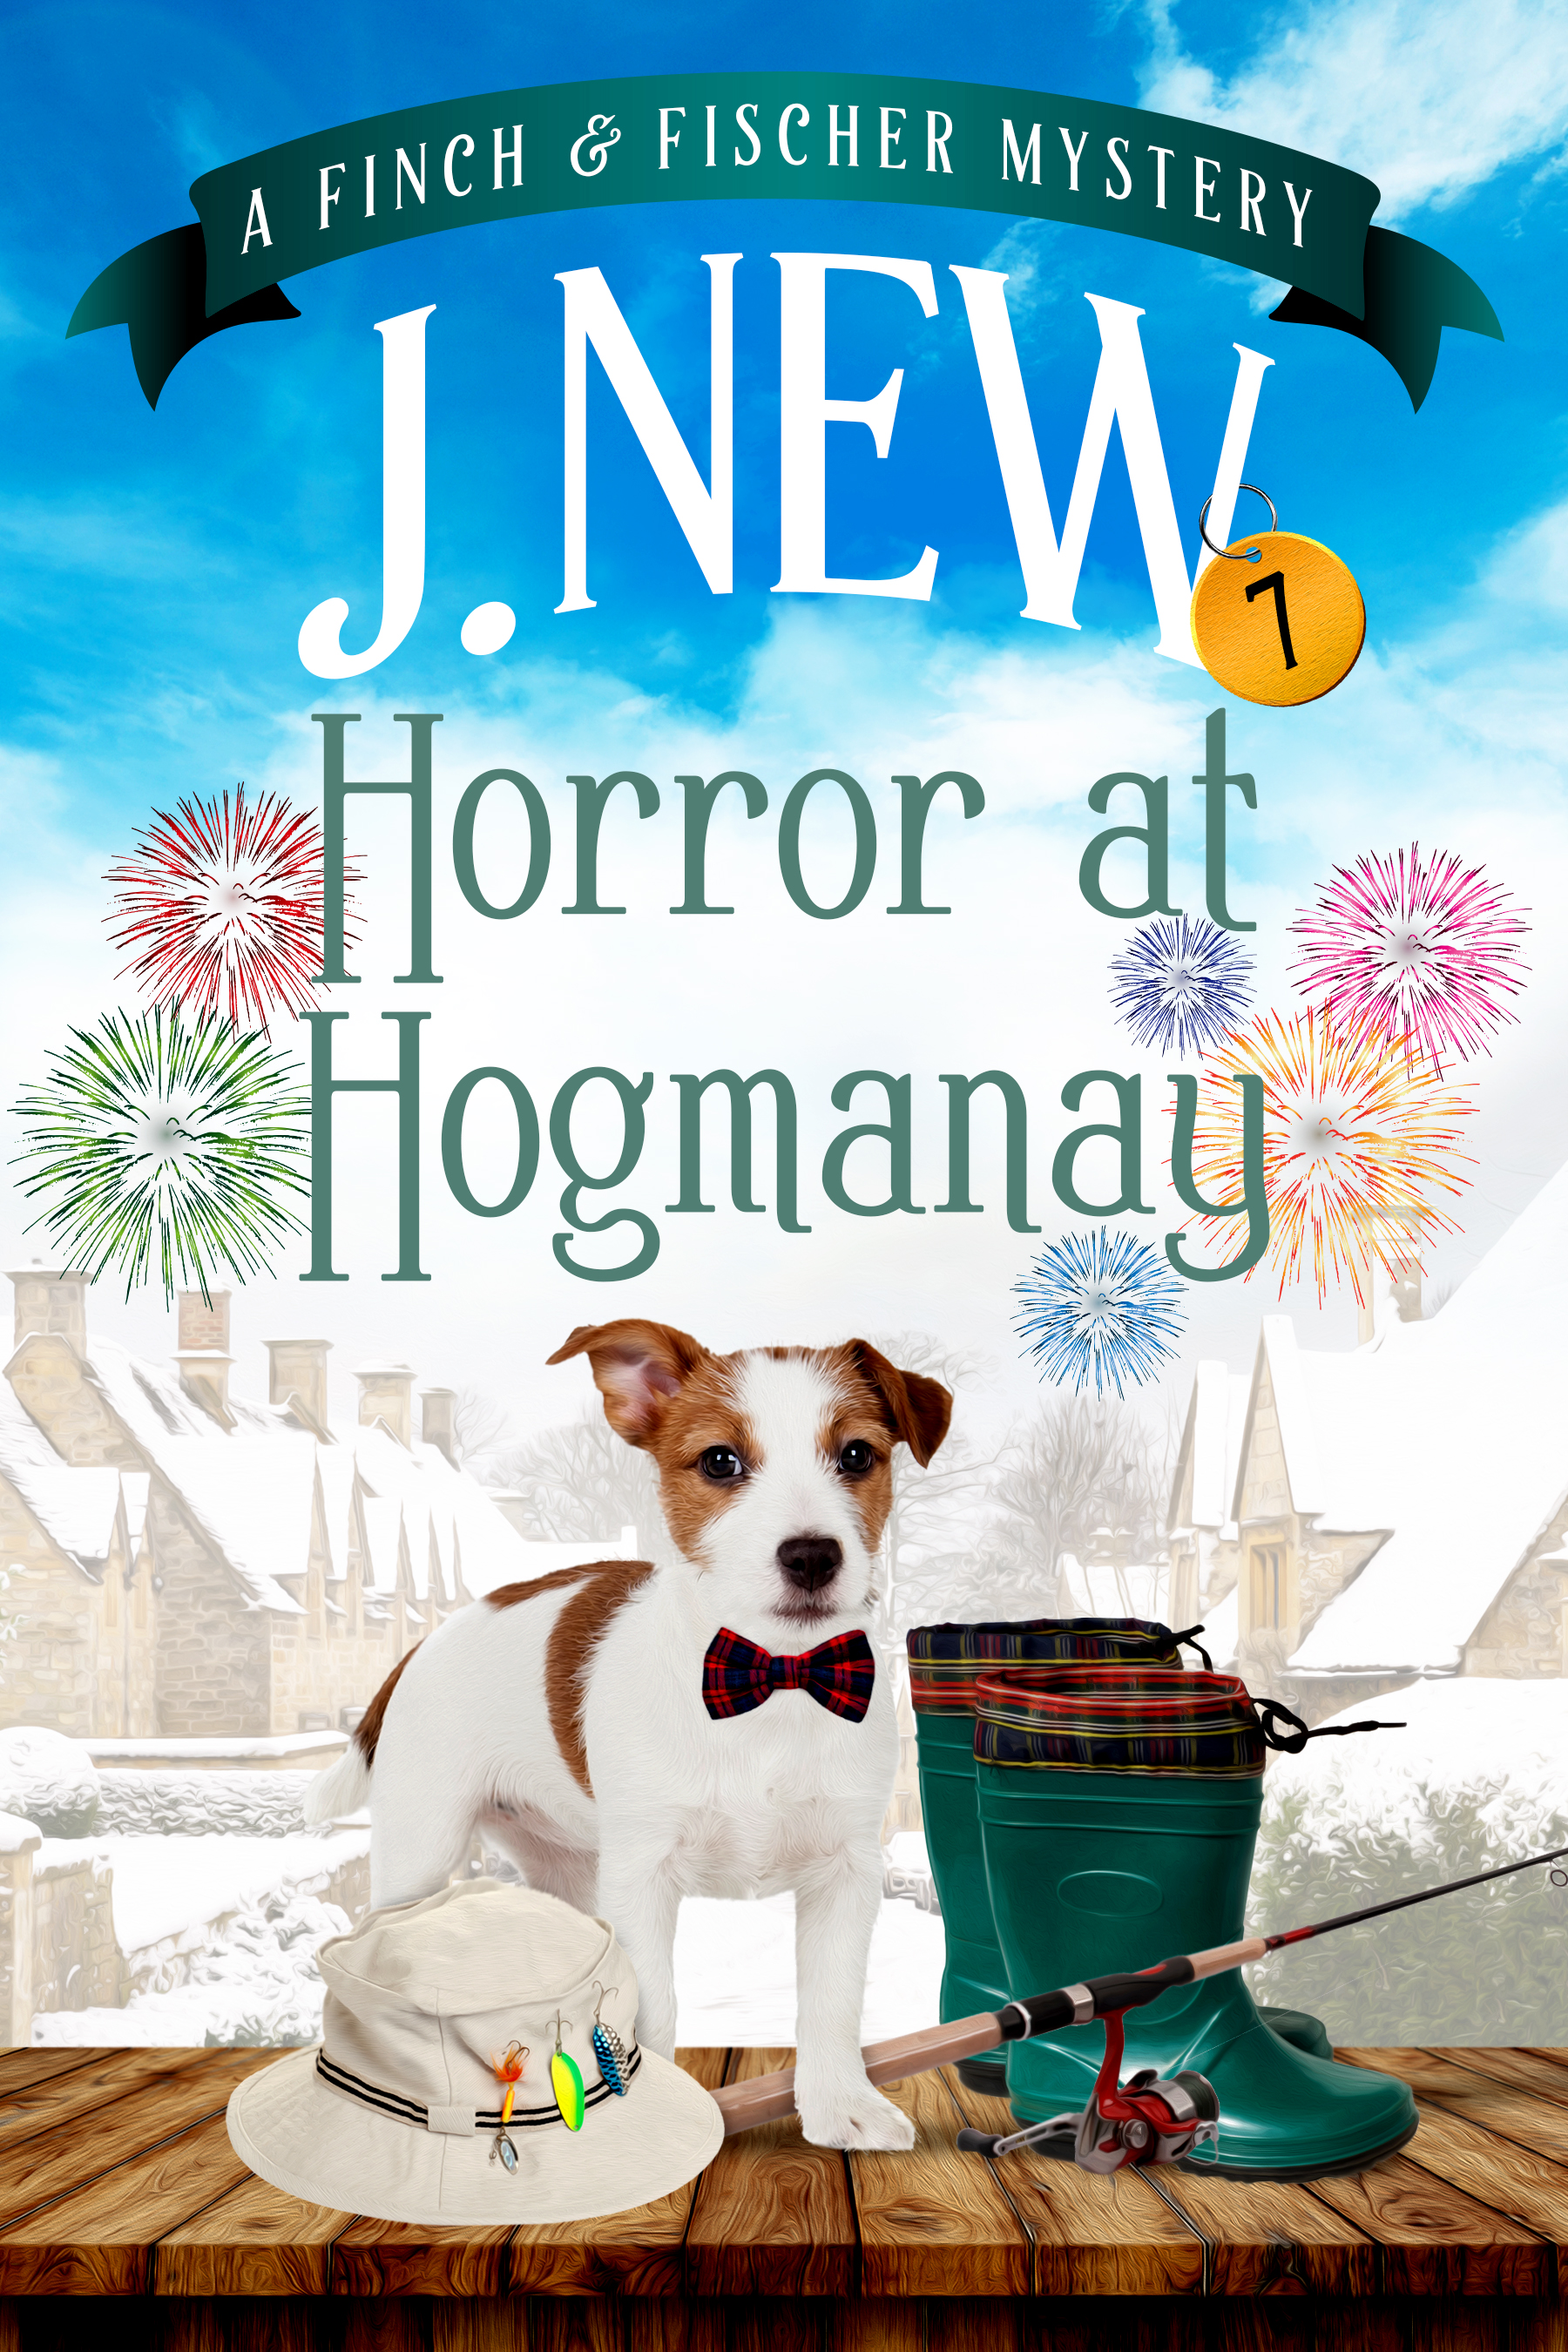 Horror at Hogmanay book 7 in the popular Finch and Fischer British Cozy Mystery series by J. New